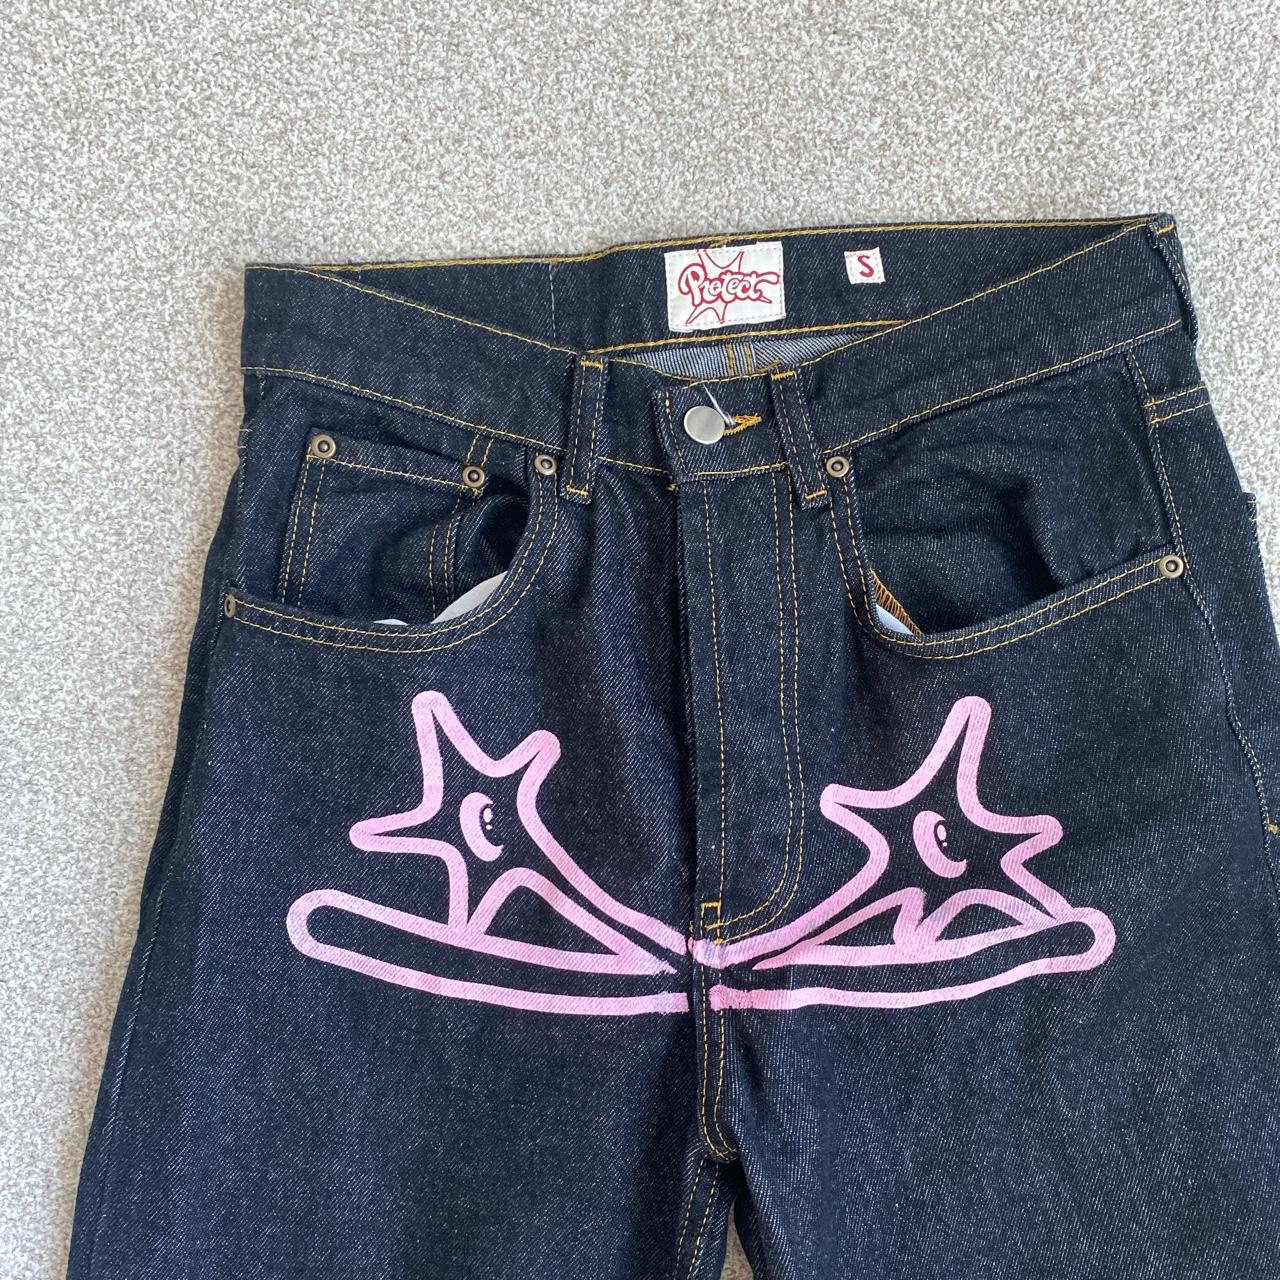 Protect ldn pink jeans 🍬 Rare piece, size S Worn 3... - Depop